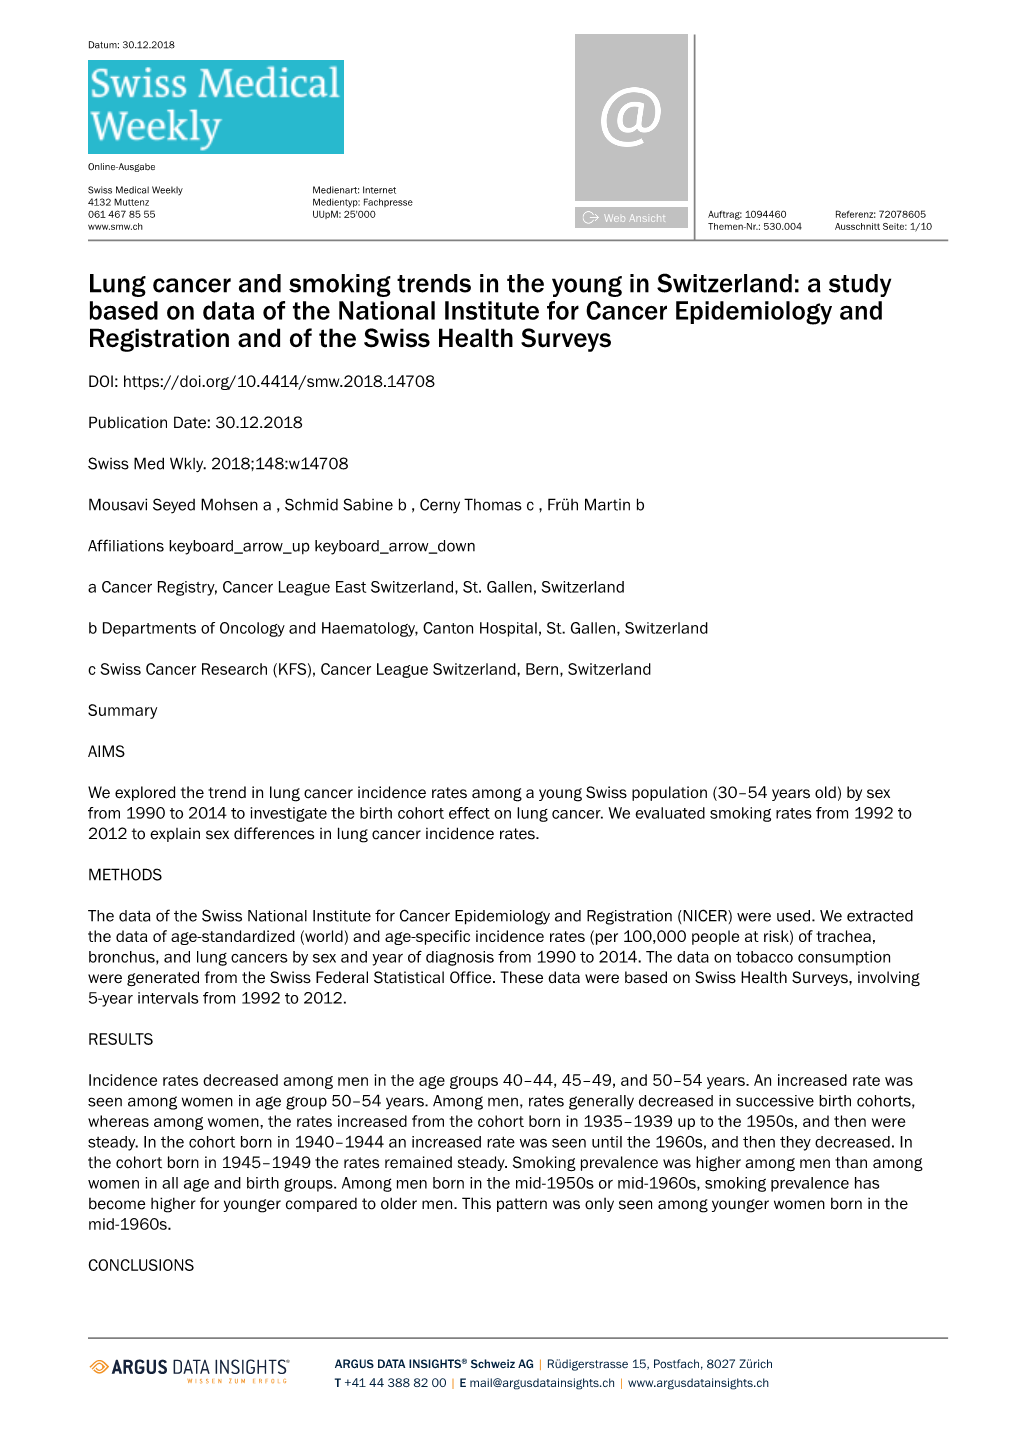 Lung Cancer and Smoking Trends in the Young in Switzerland: a Study